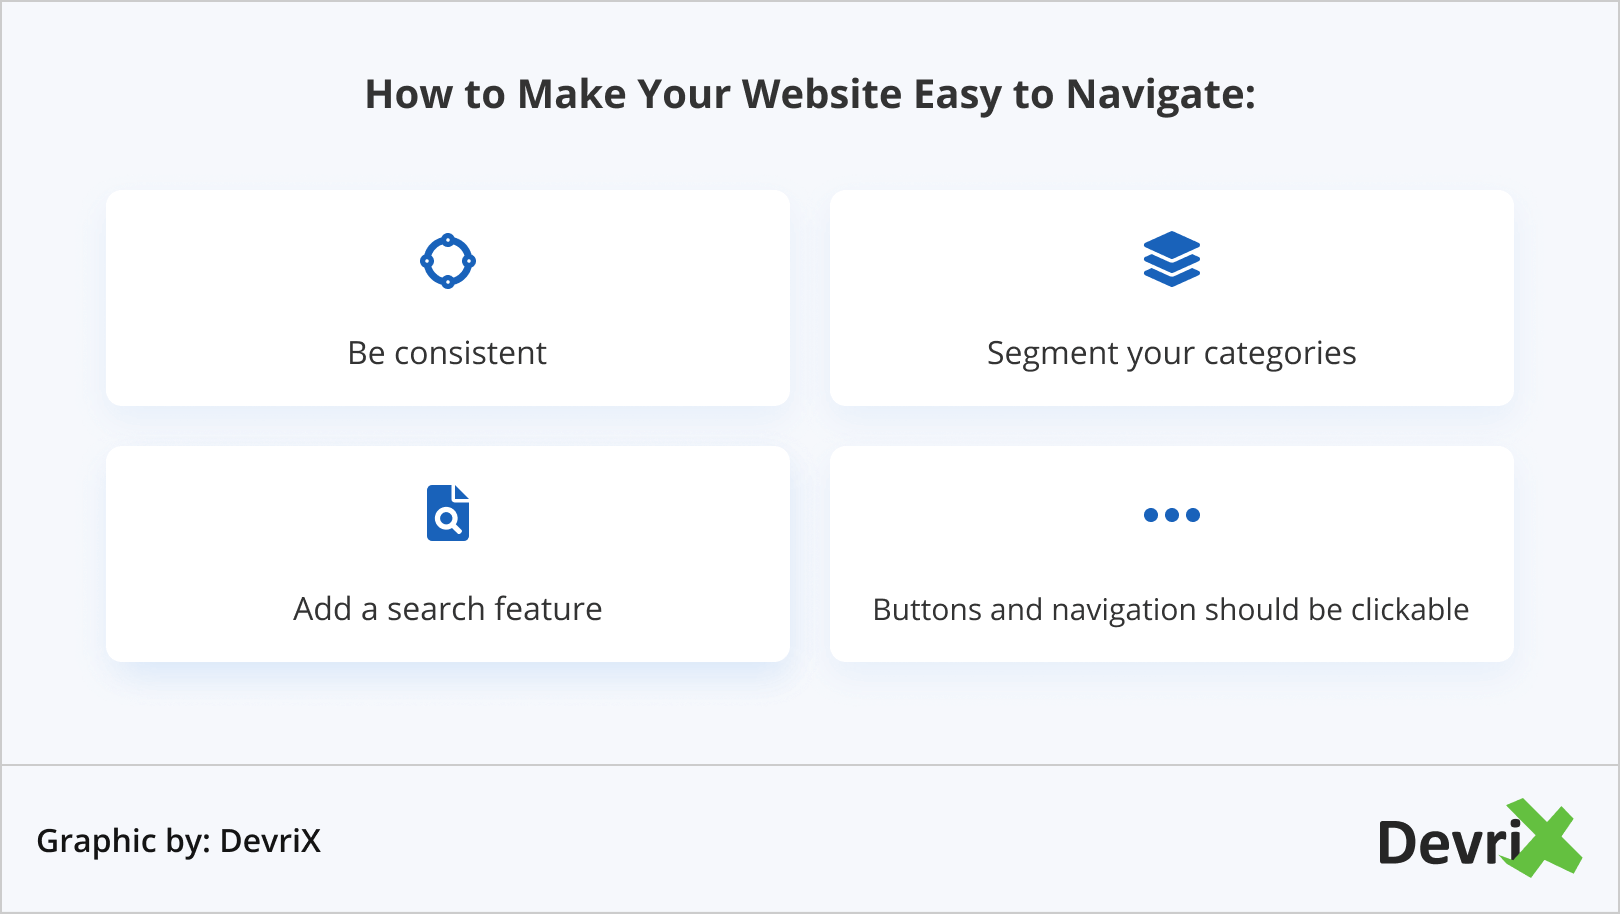 How to Make Your Website Easy to Navigate